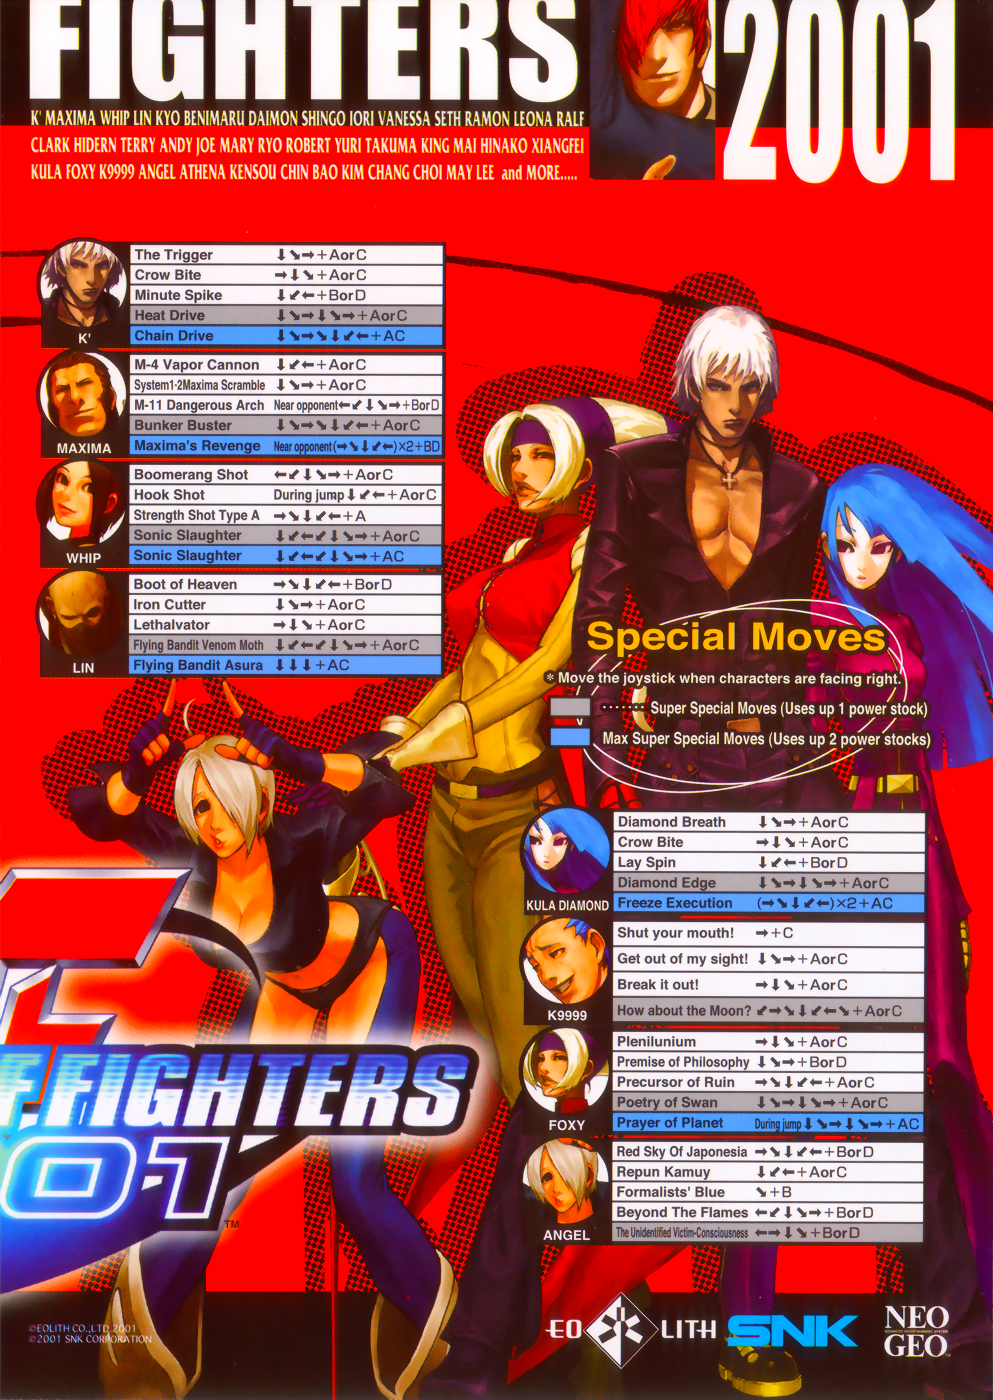 The King of Fighters 2001 (NGH-2621) flyer